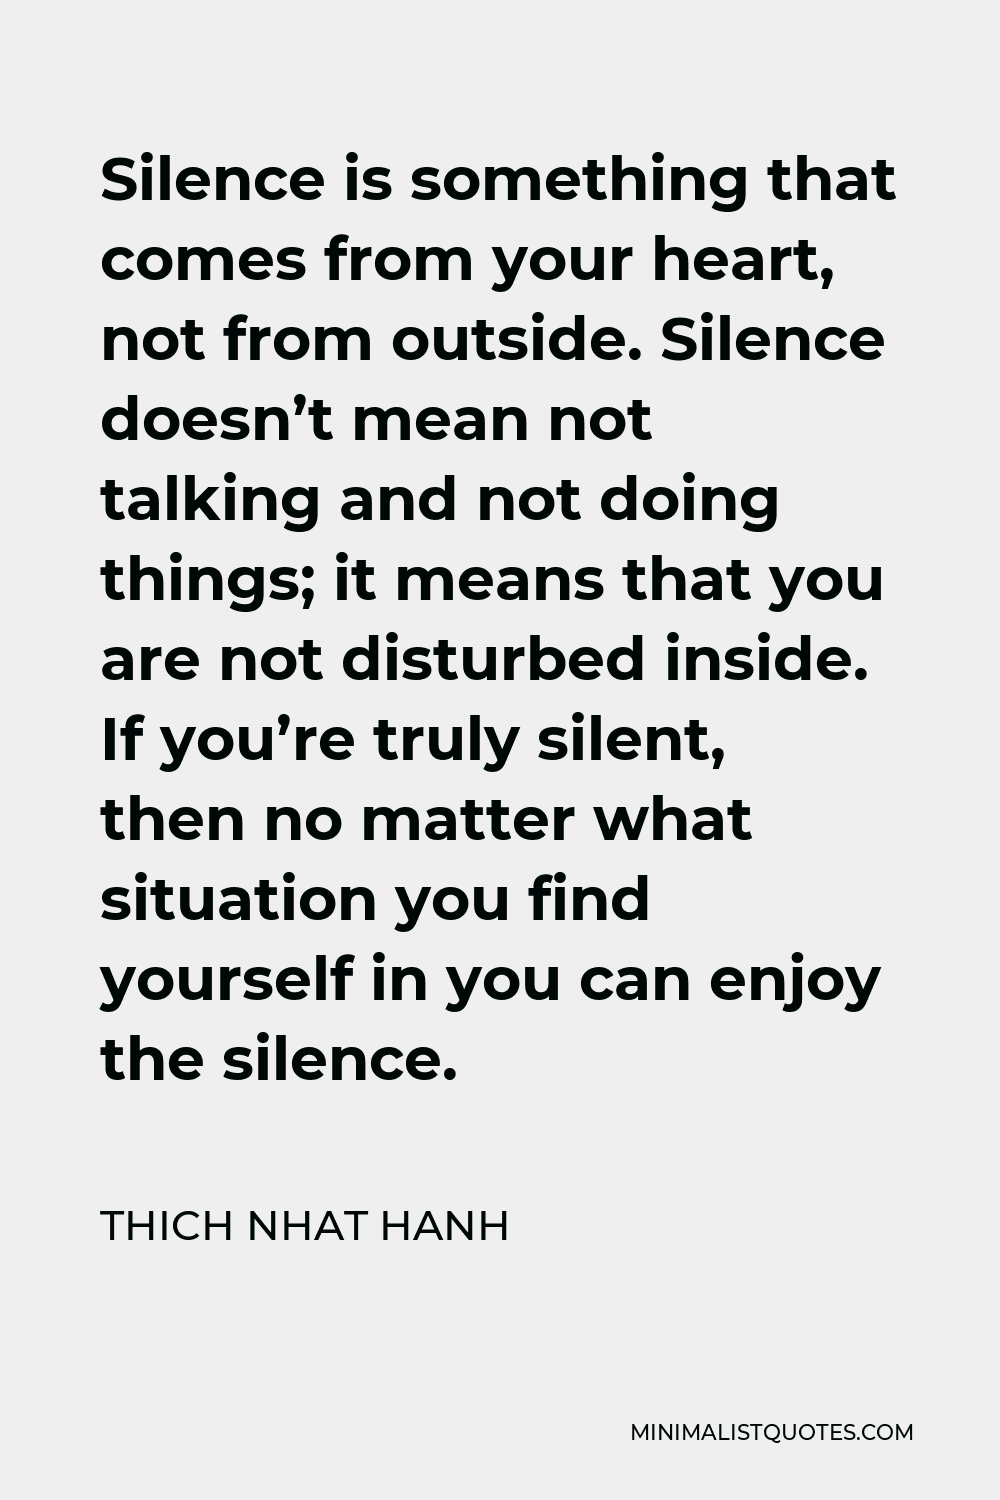 Thich Nhat Hanh Quote - Silence is something that comes from your heart, not from outside. Silence doesn’t mean not talking and not doing things; it means that you are not disturbed inside. If you’re truly silent, then no matter what situation you find yourself in you can enjoy the silence.